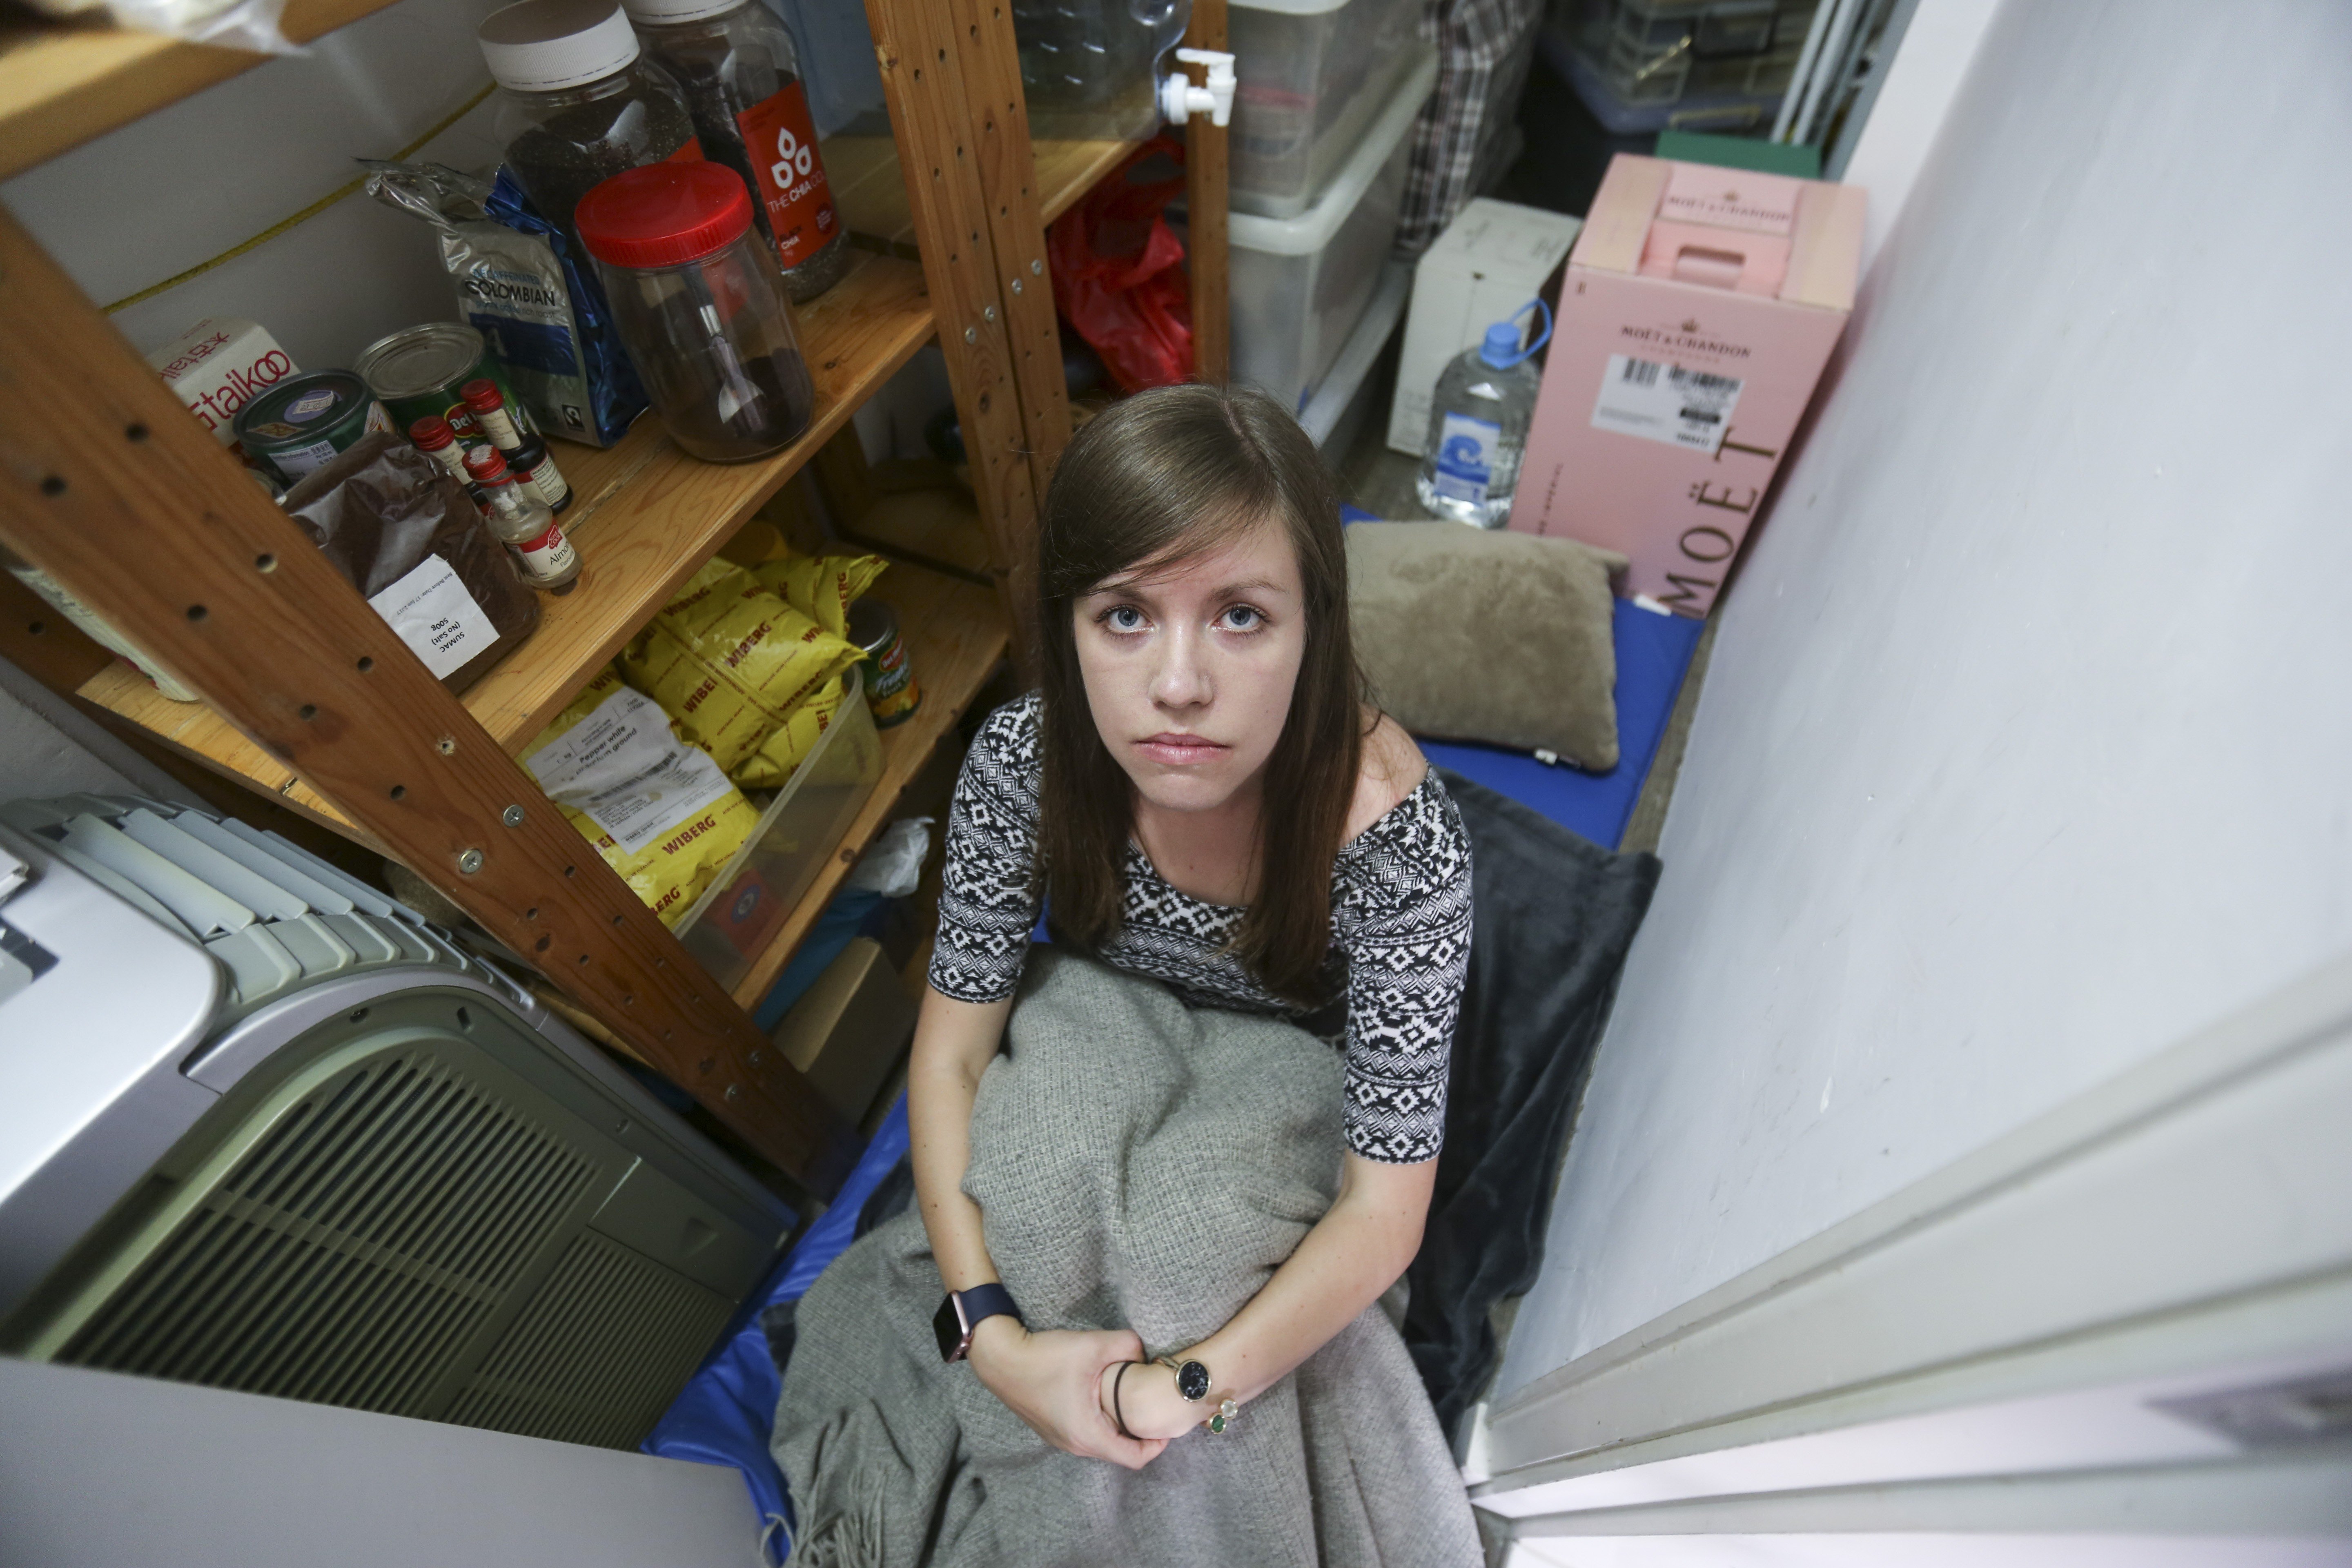 As an experiment, reporter Rachel Blundy spends a night in cramped quarters like many domestic helpers do. Photo: Xiaomei Chen